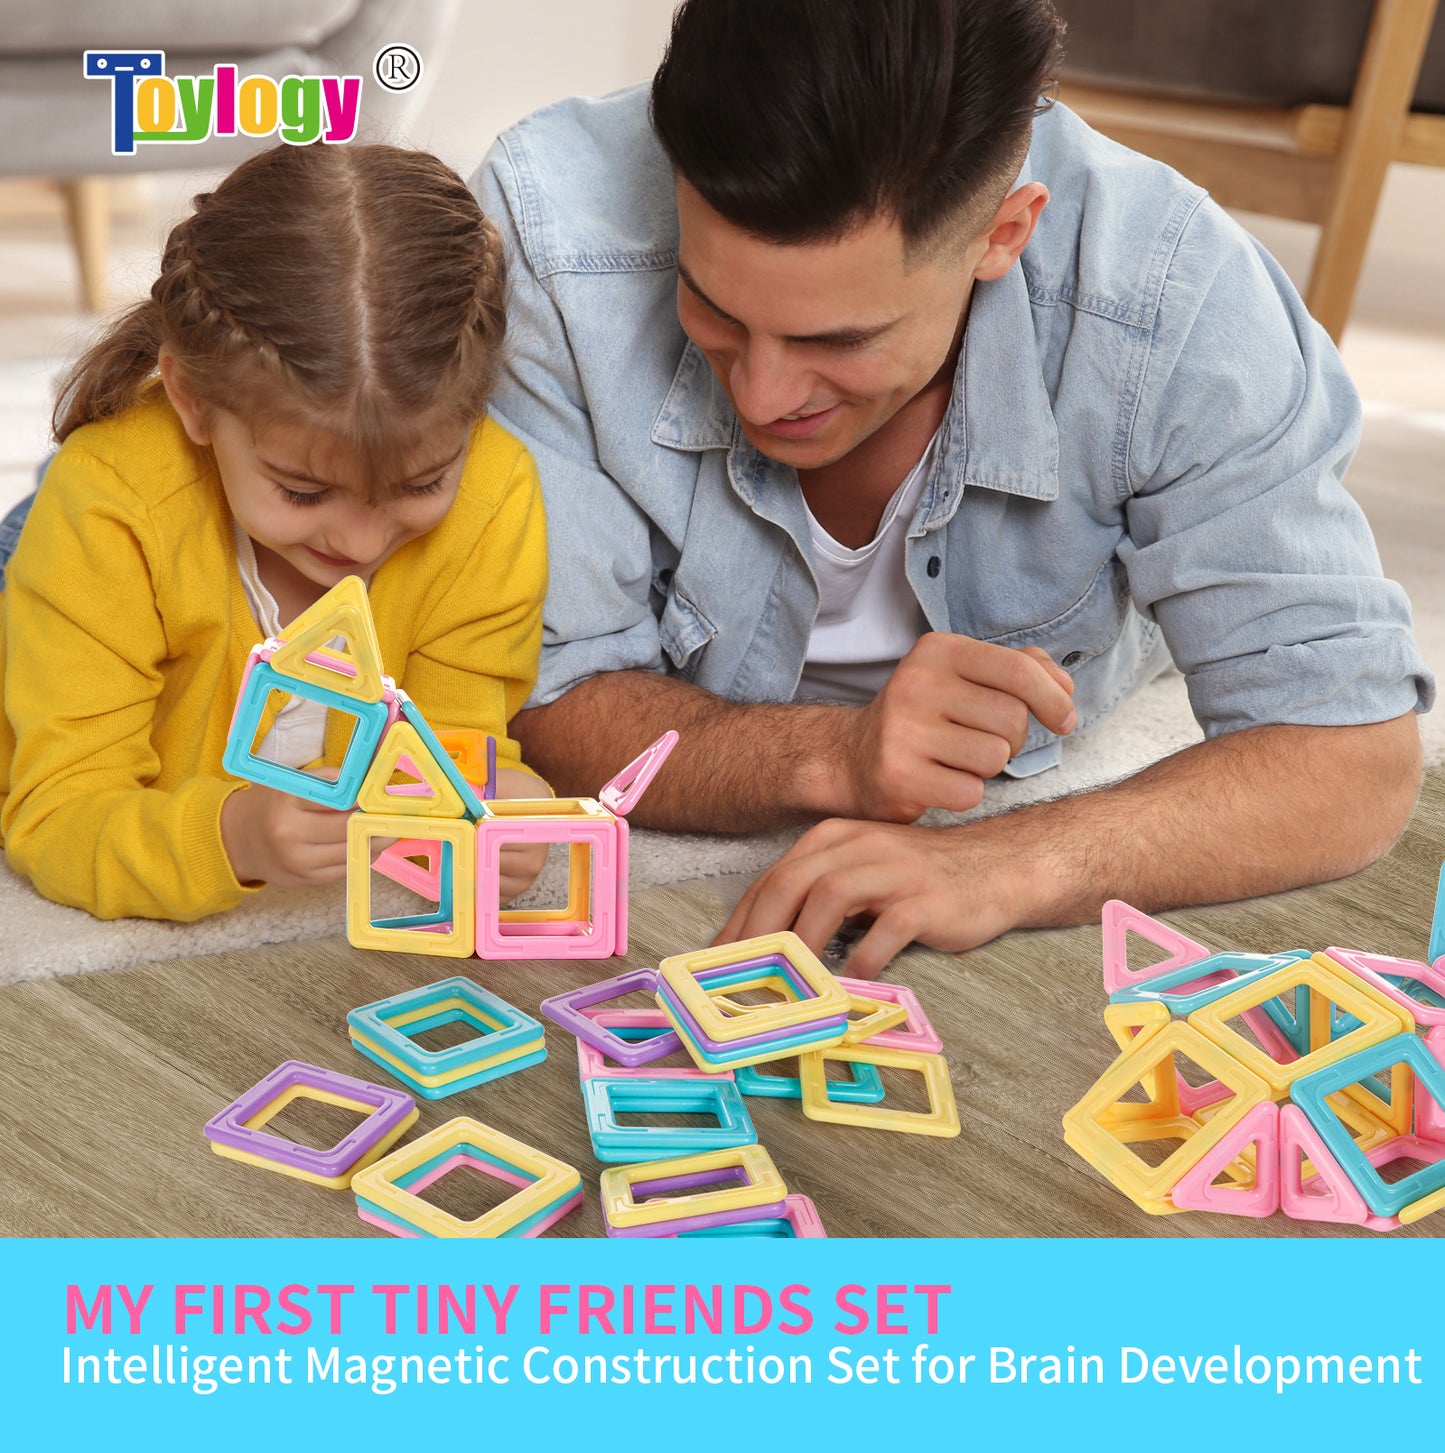 Upgraded Magnetic Tiles Toys for 3 4 5 6 7 Year Old Boys Girls Magnetic Blocks Building Set for Toddlers STEM Learning Toys for Kids Boredom Buster Educational Toys Gifts